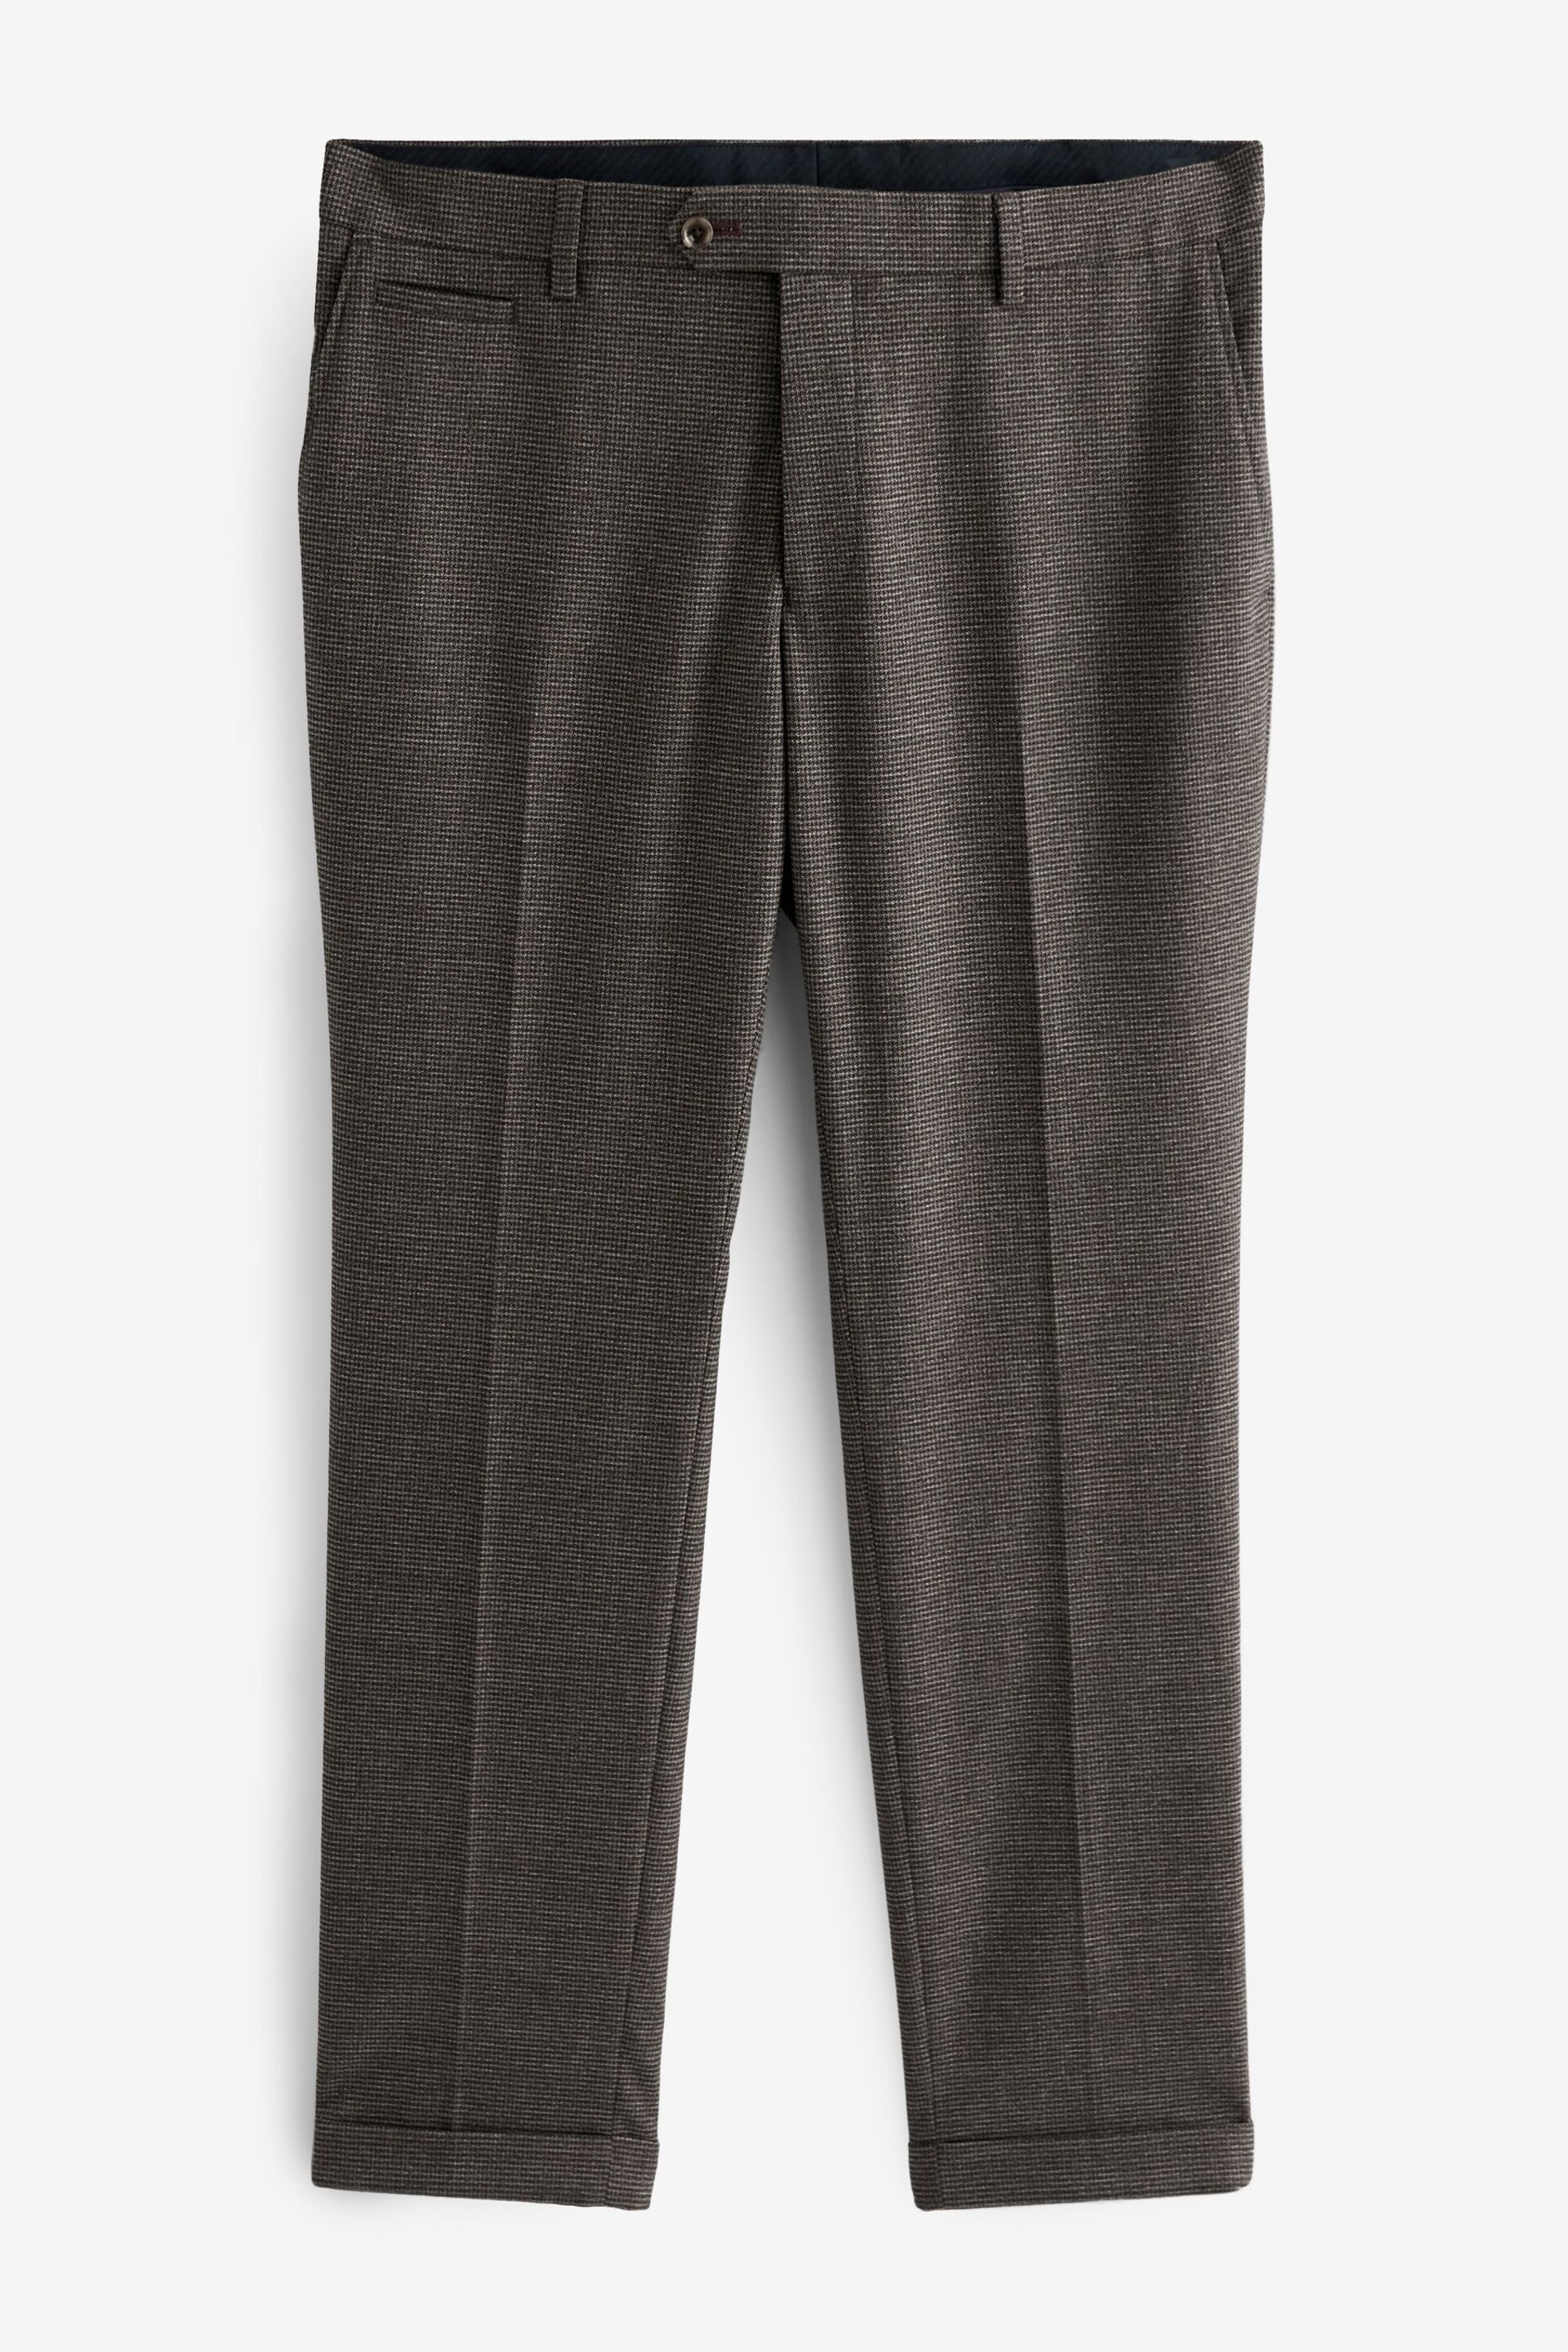 Brown Tailored Fit Trimmed Texture Suit Trousers - Image 6 of 9